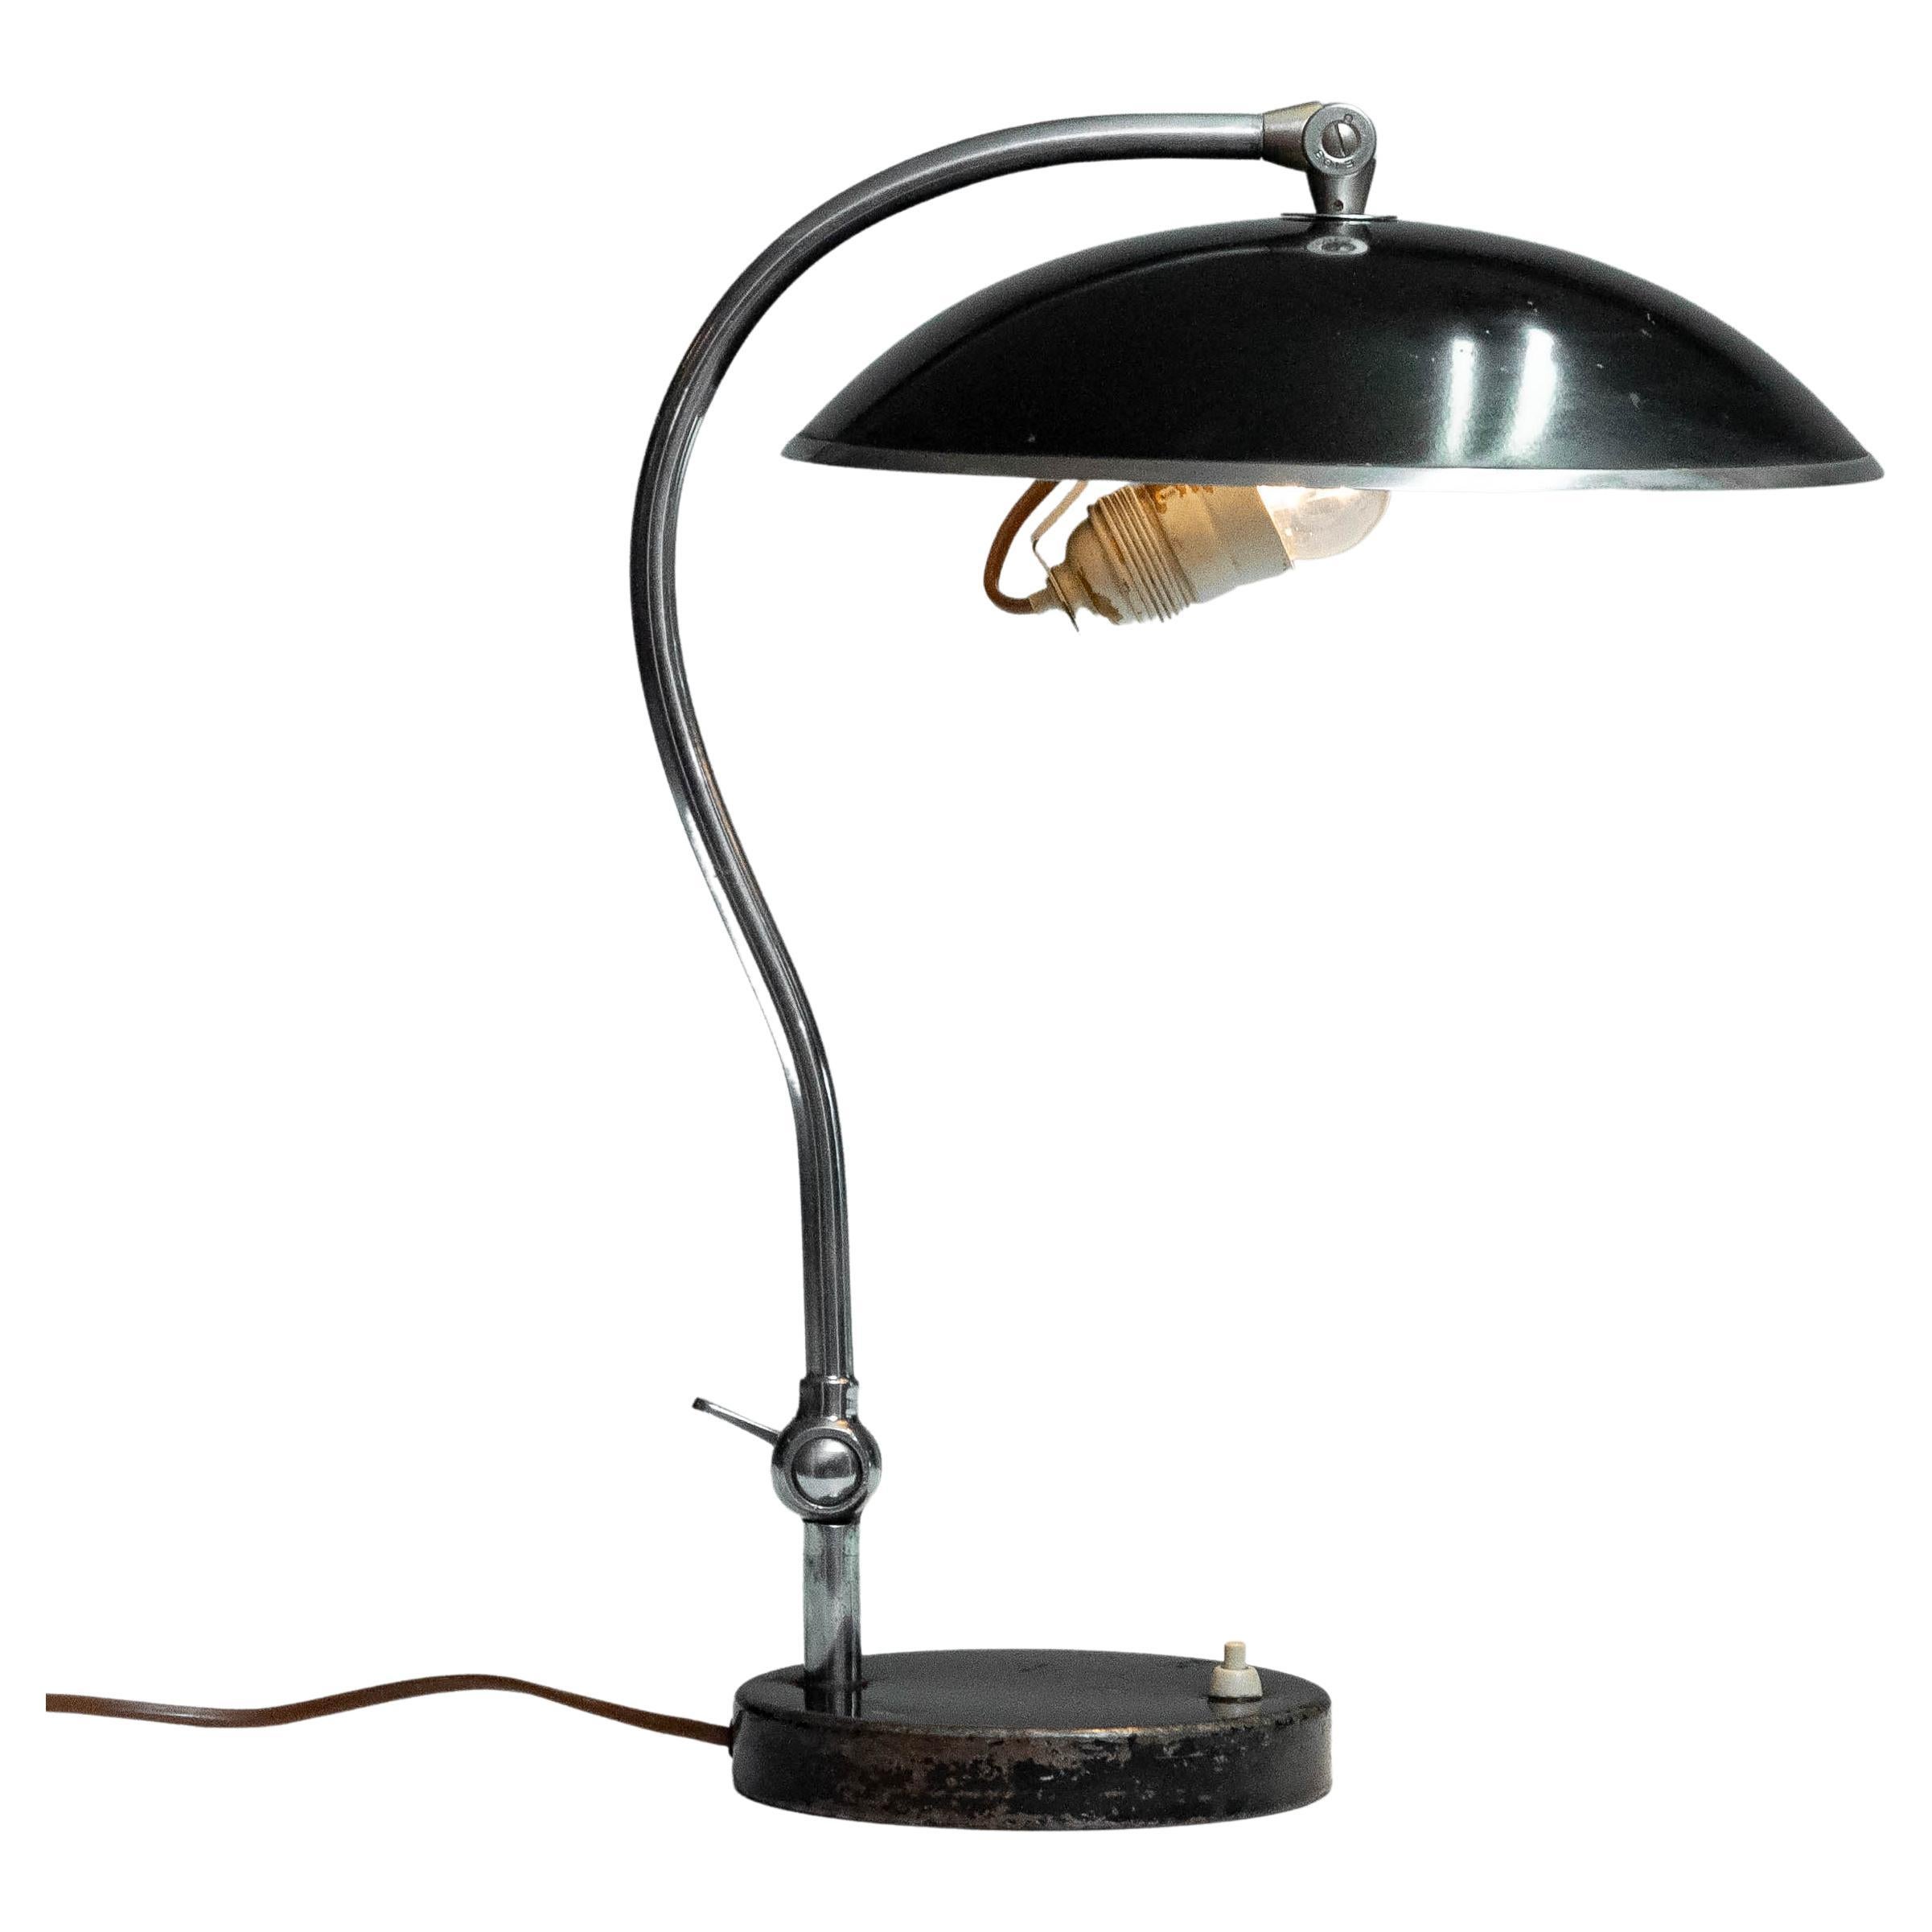 Beautiful and original black lacquered desk / table lamp made in Sweden by Boréns Borås in the 1930s, Model number 528. This model was a inspiration for more companies who where inspired by this Bauhaus style desk / table lamp and therefor also